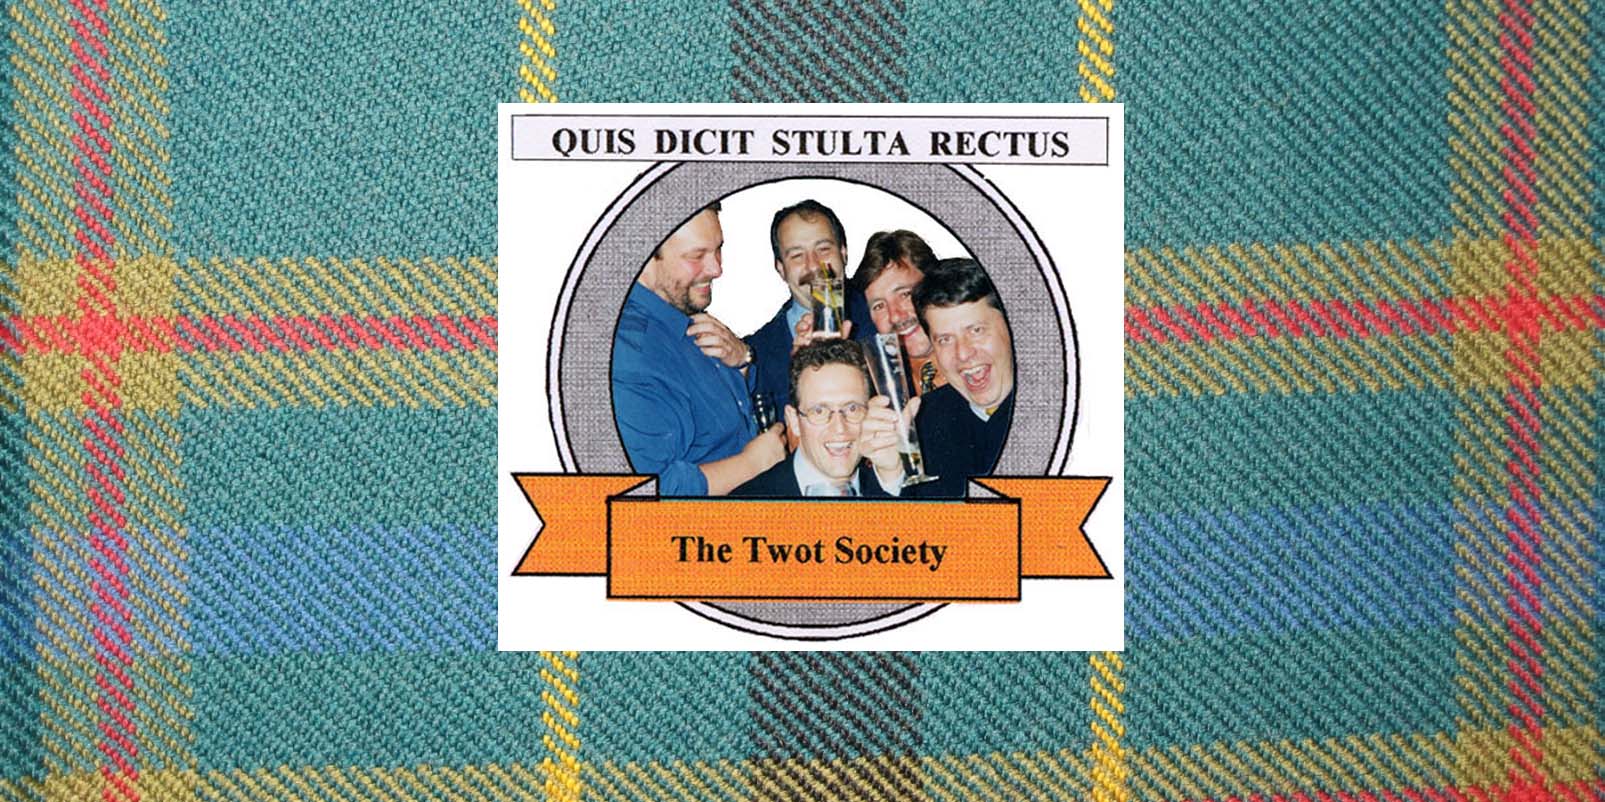 THE TWOT SOCIETY